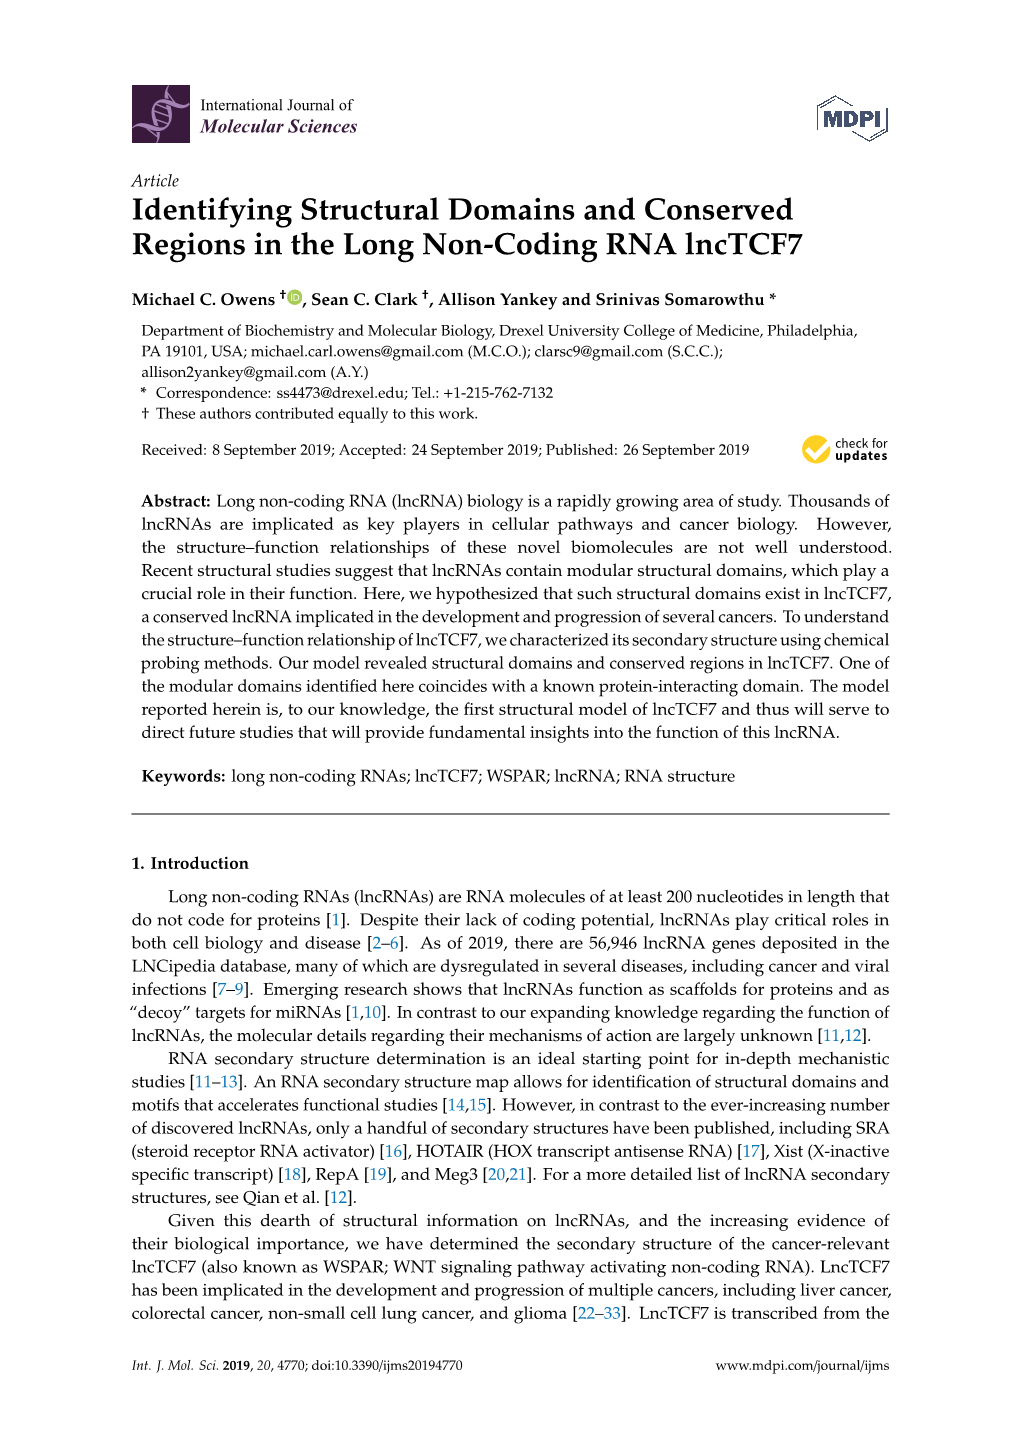 Identifying Structural Domains and Conserved Regions in the Long Non-Coding RNA Lnctcf7